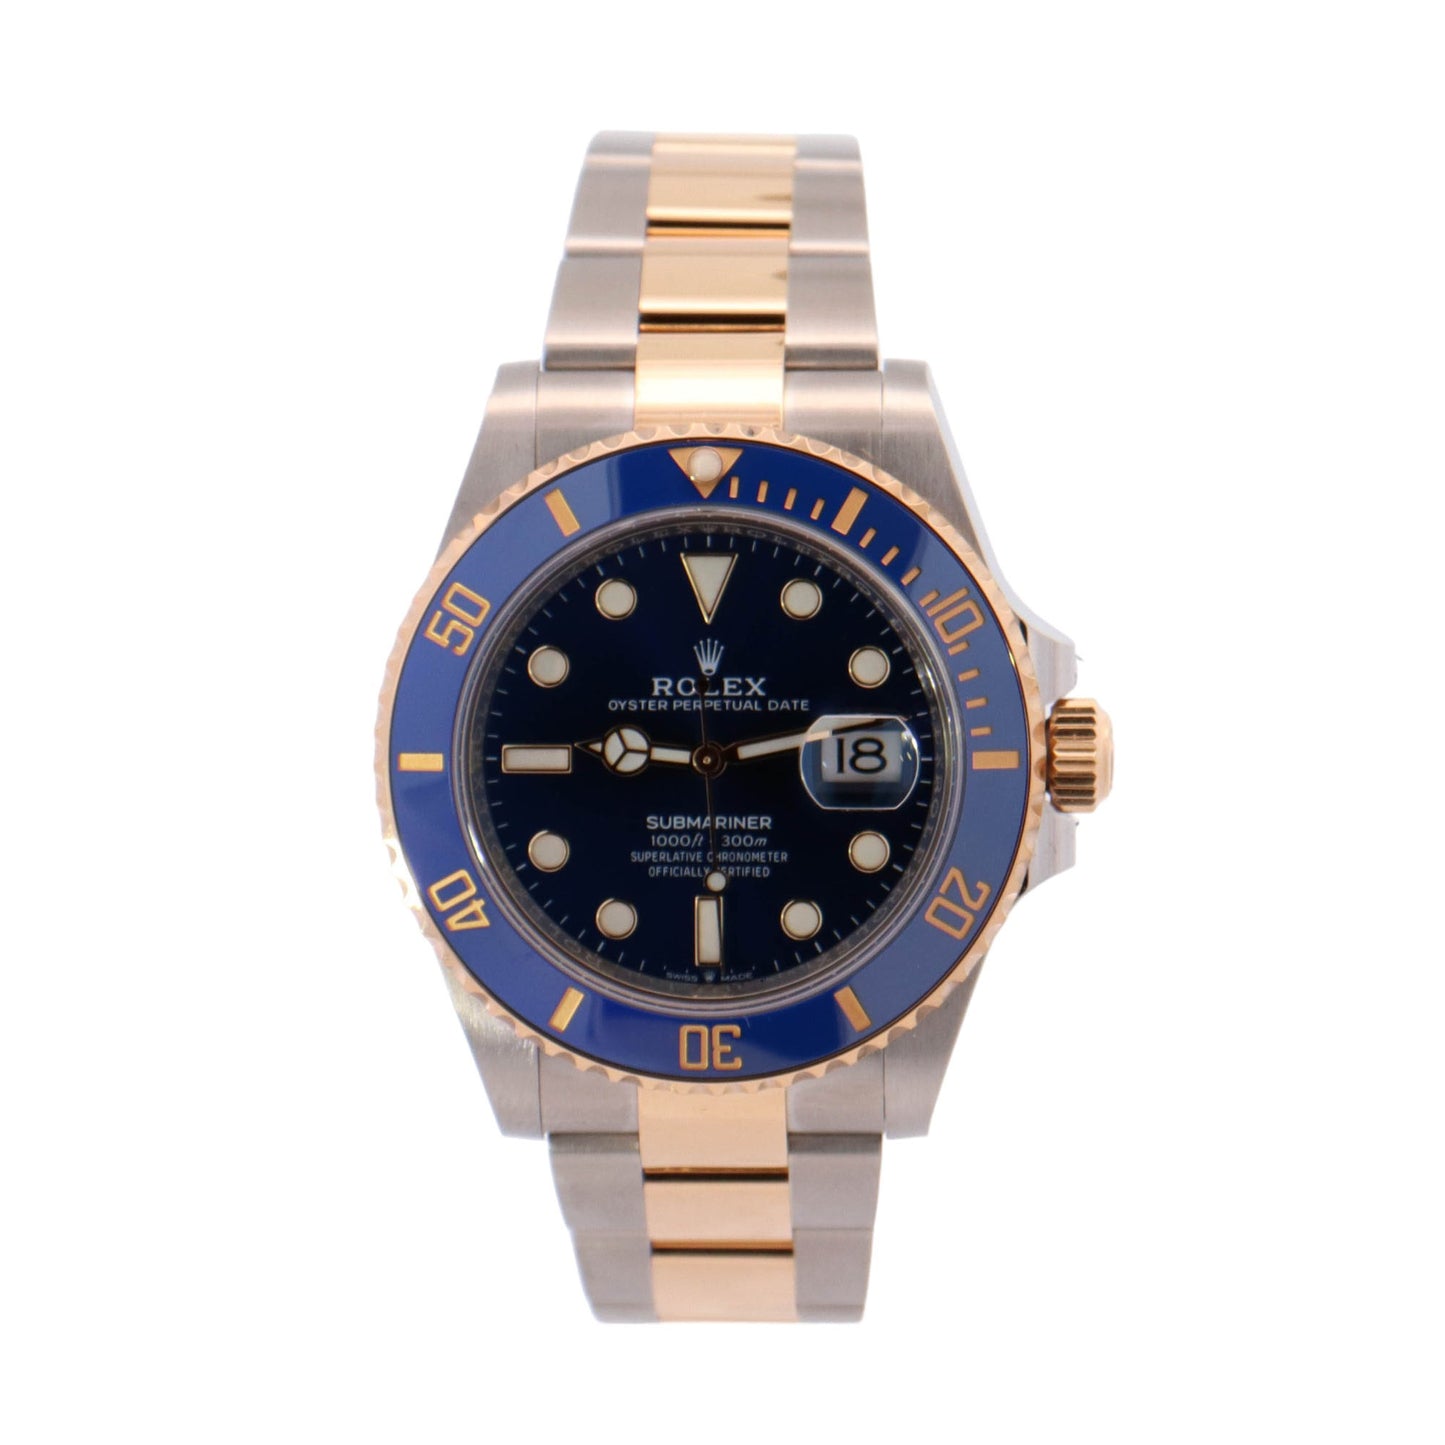 Rolex Submariner Two-Tone Stainless Steel & Yellow Gold 41mm Blue Dot Dial Watch Reference #: 126613LB